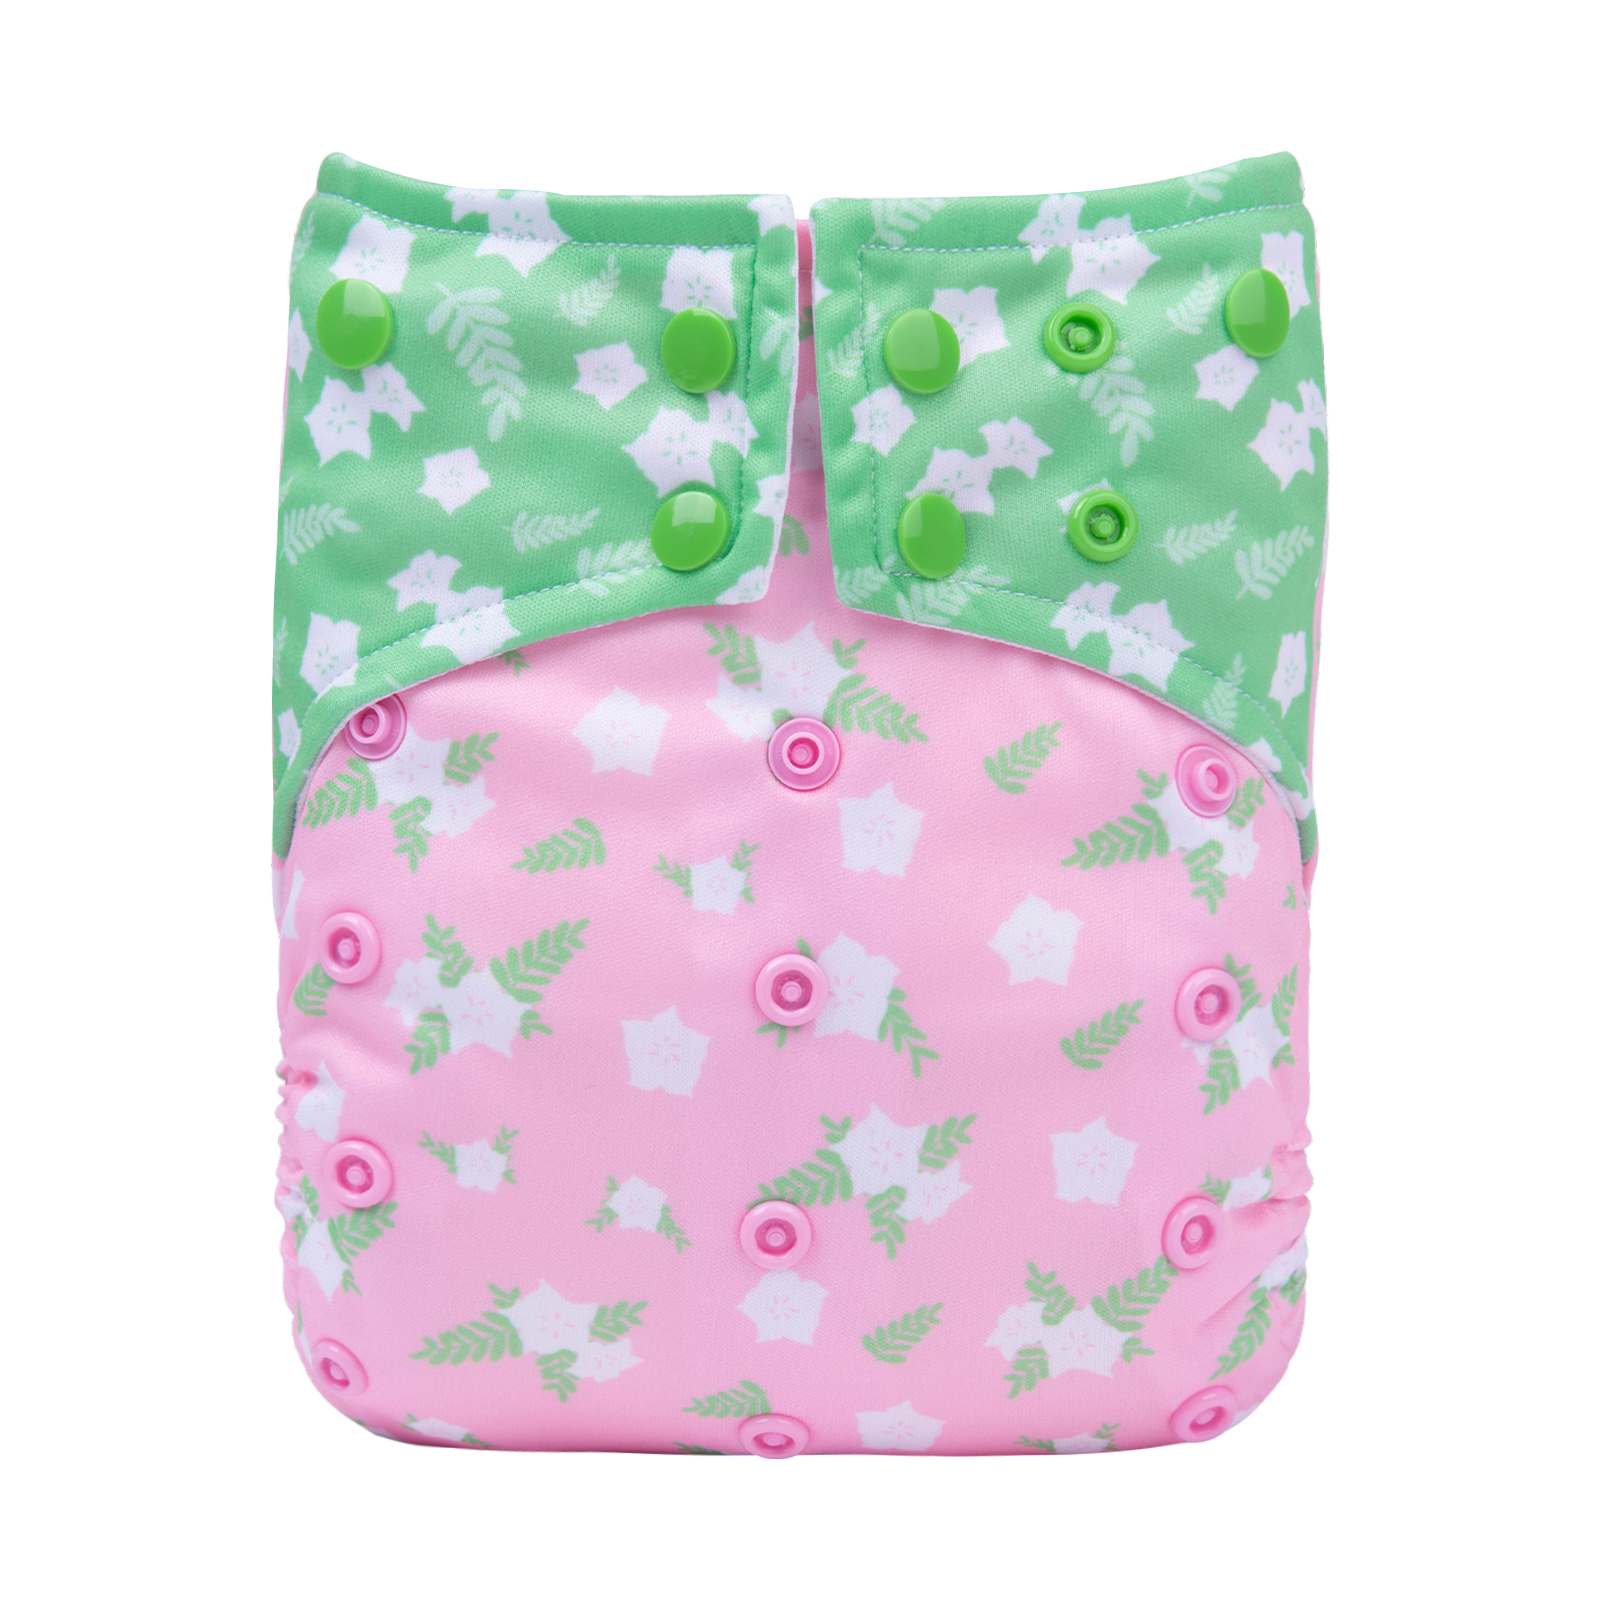 AWJ Diaper with Mesh Lining Printed Diaper-WJ02A